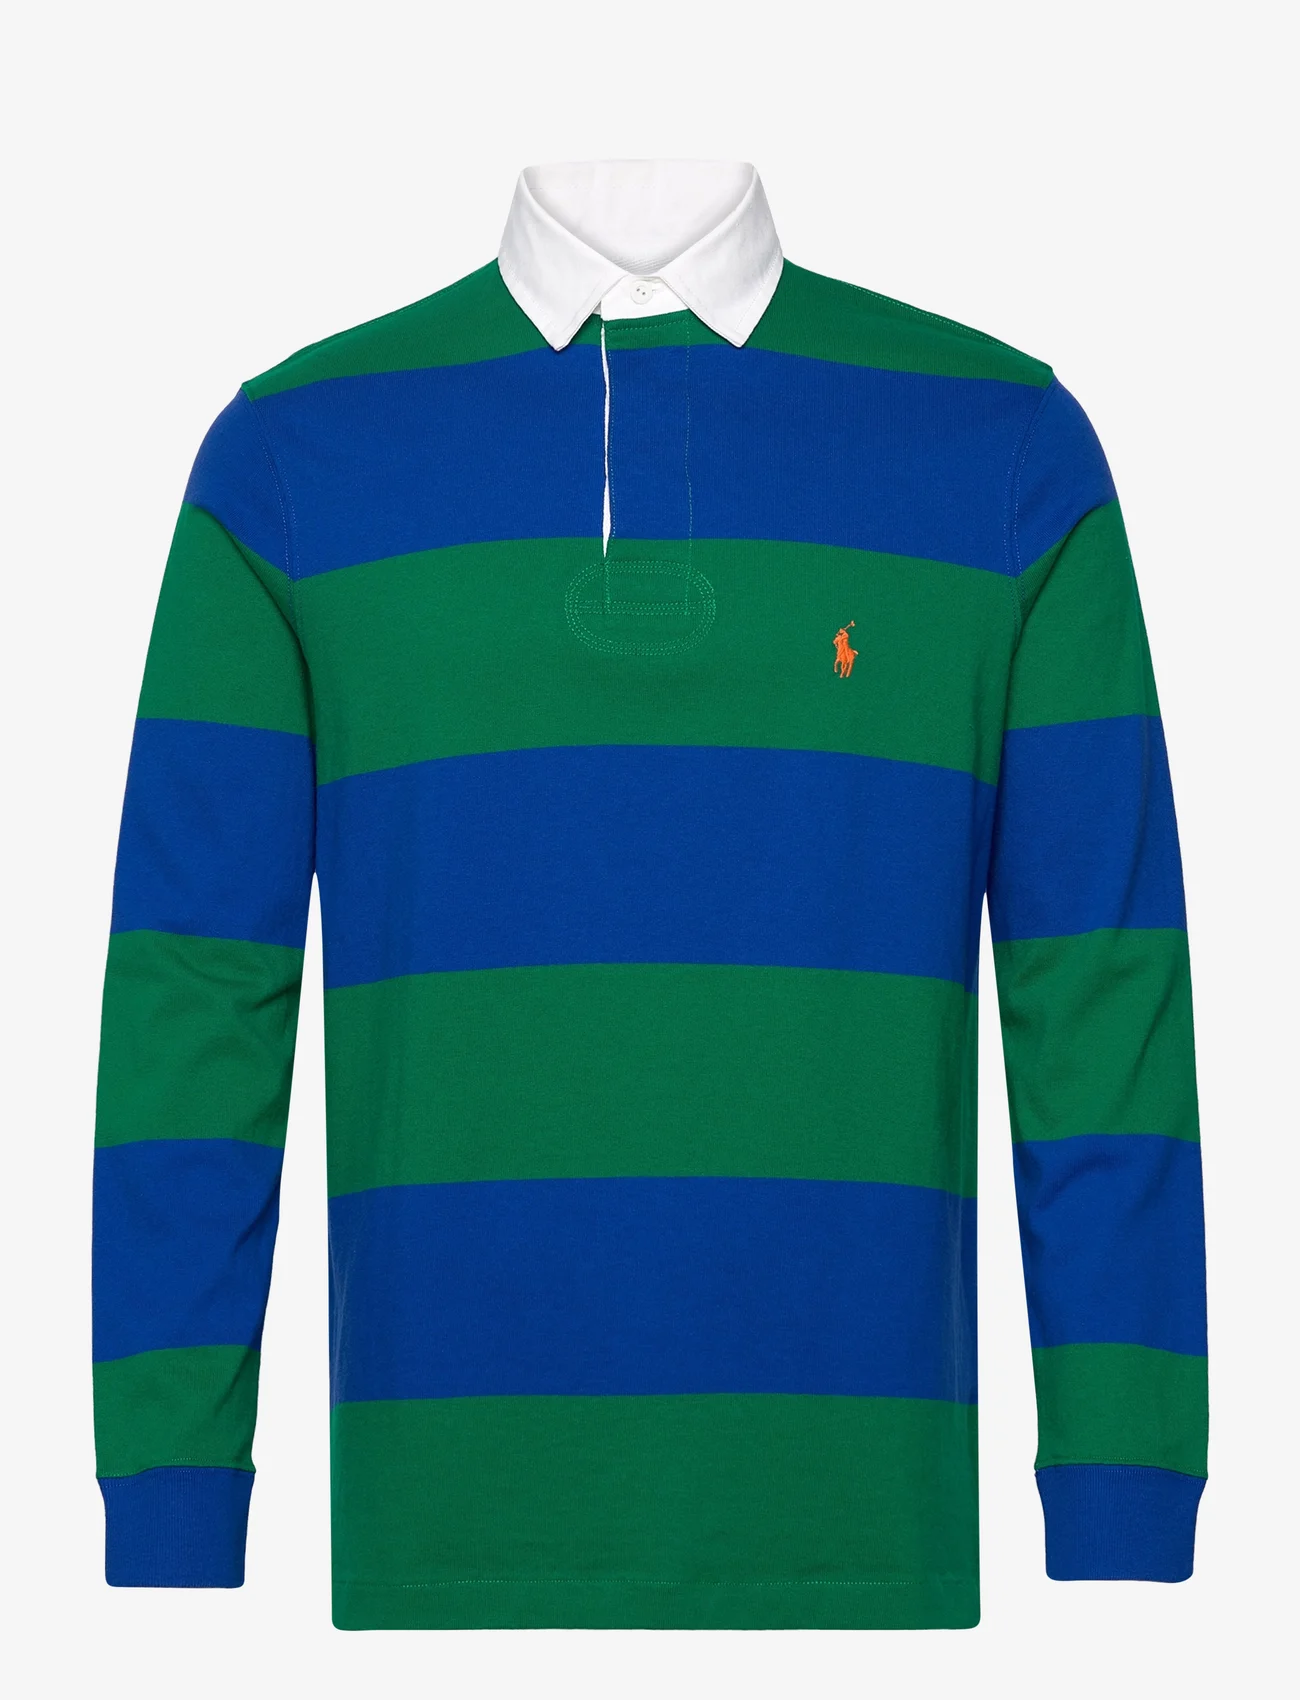 humane Kan hellige Polo Ralph Lauren Classic Fit Striped Jersey Rugby Shirt - Long-sleeved  polos - Boozt.com